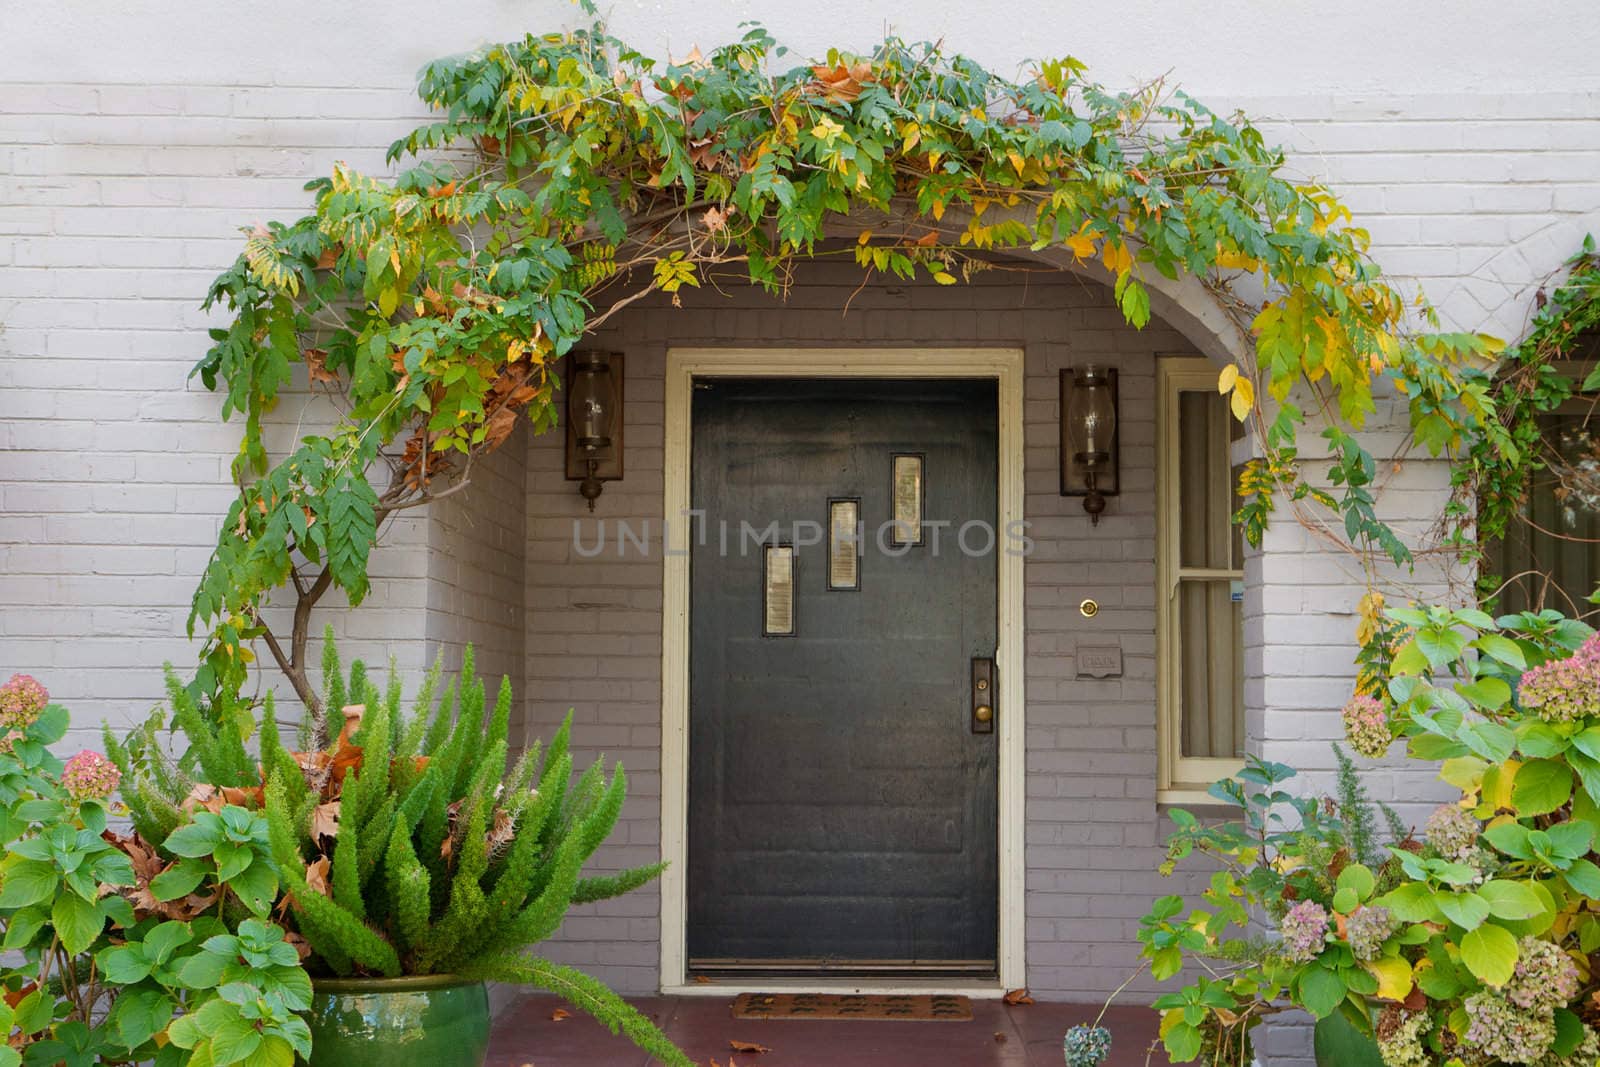 Wisteria arched  black windowed door with further framing of fern and other plants